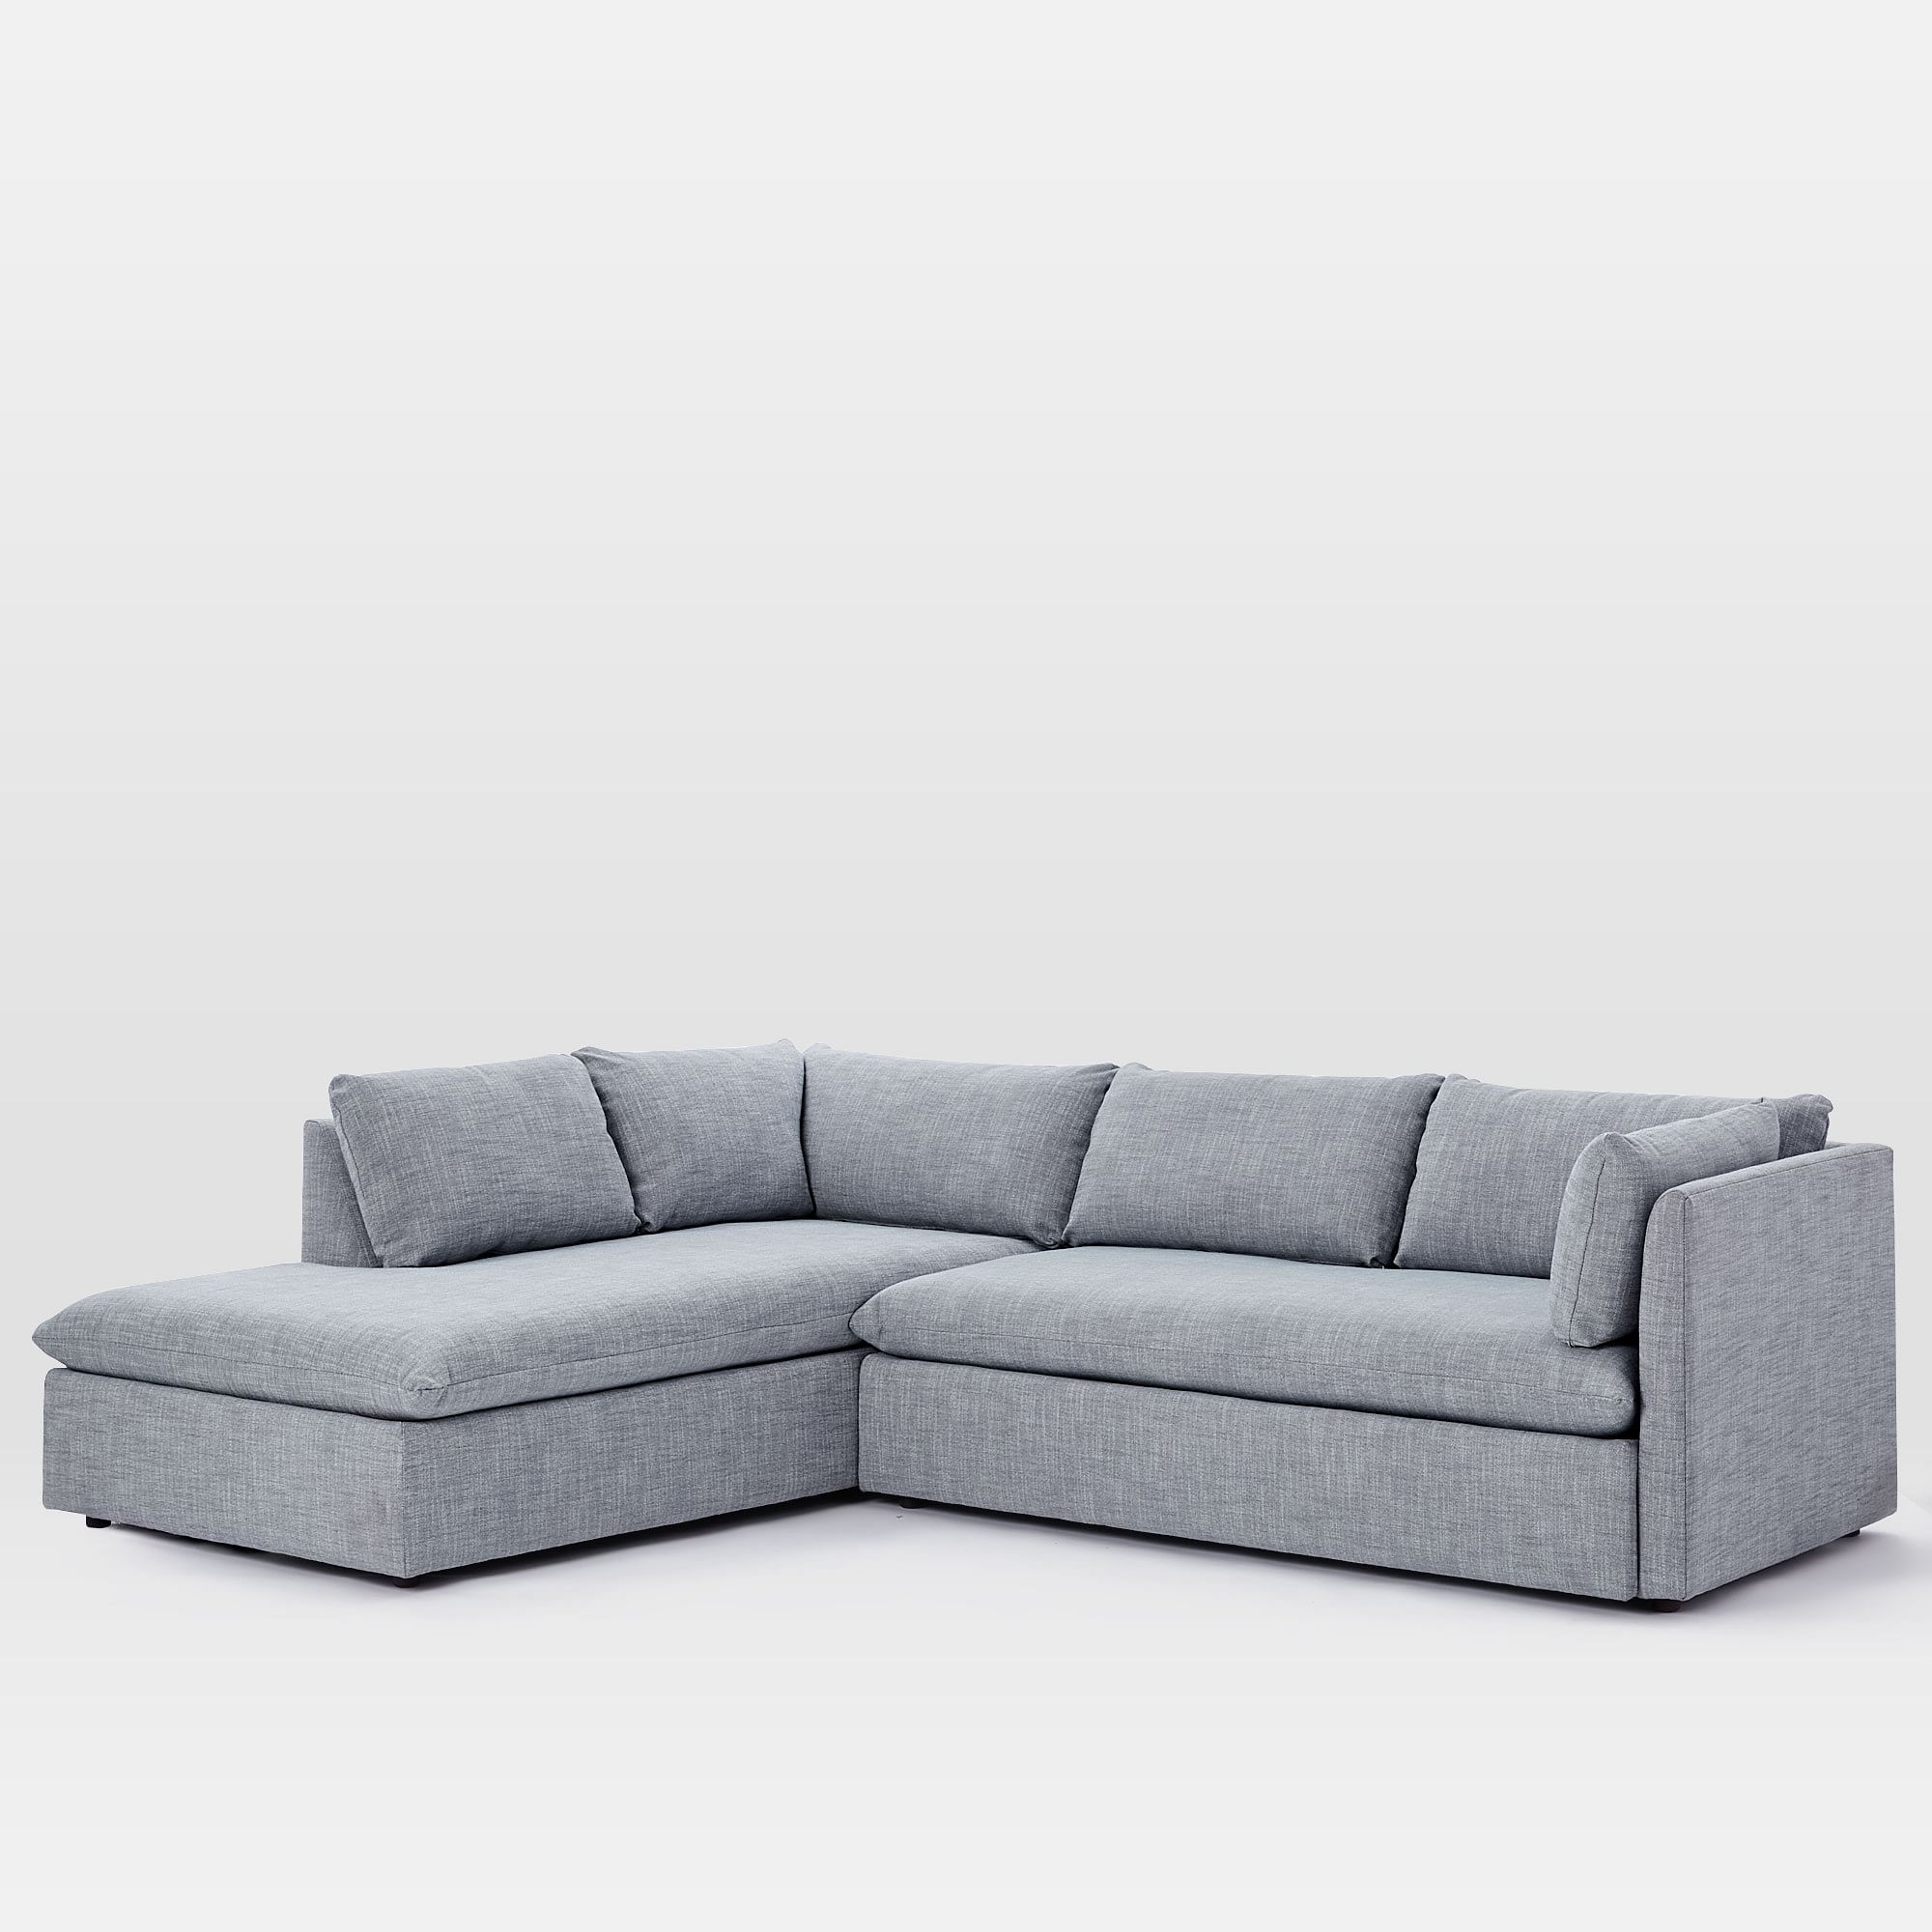 Shelter 106" Left 2-Piece Bumper Chaise Sectional, Yarn Dyed Linen Weave, graphite - Image 0